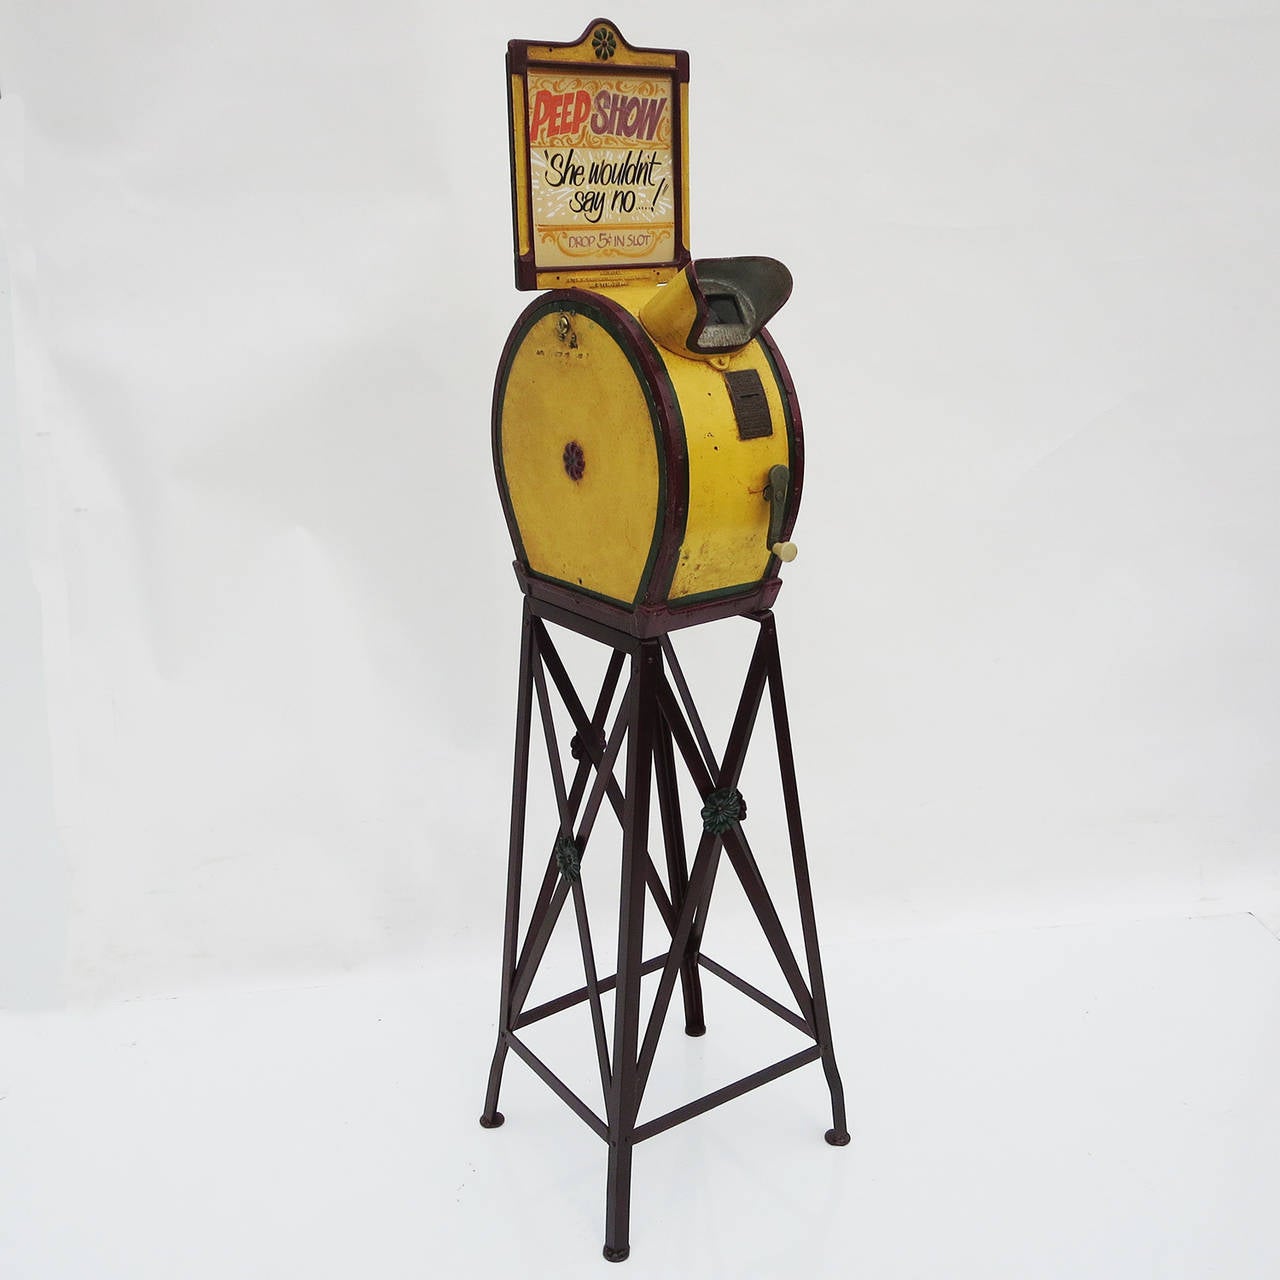 Considered one of the first forms of motion pictures, the Mutoscope operated on a very simple principle. A 